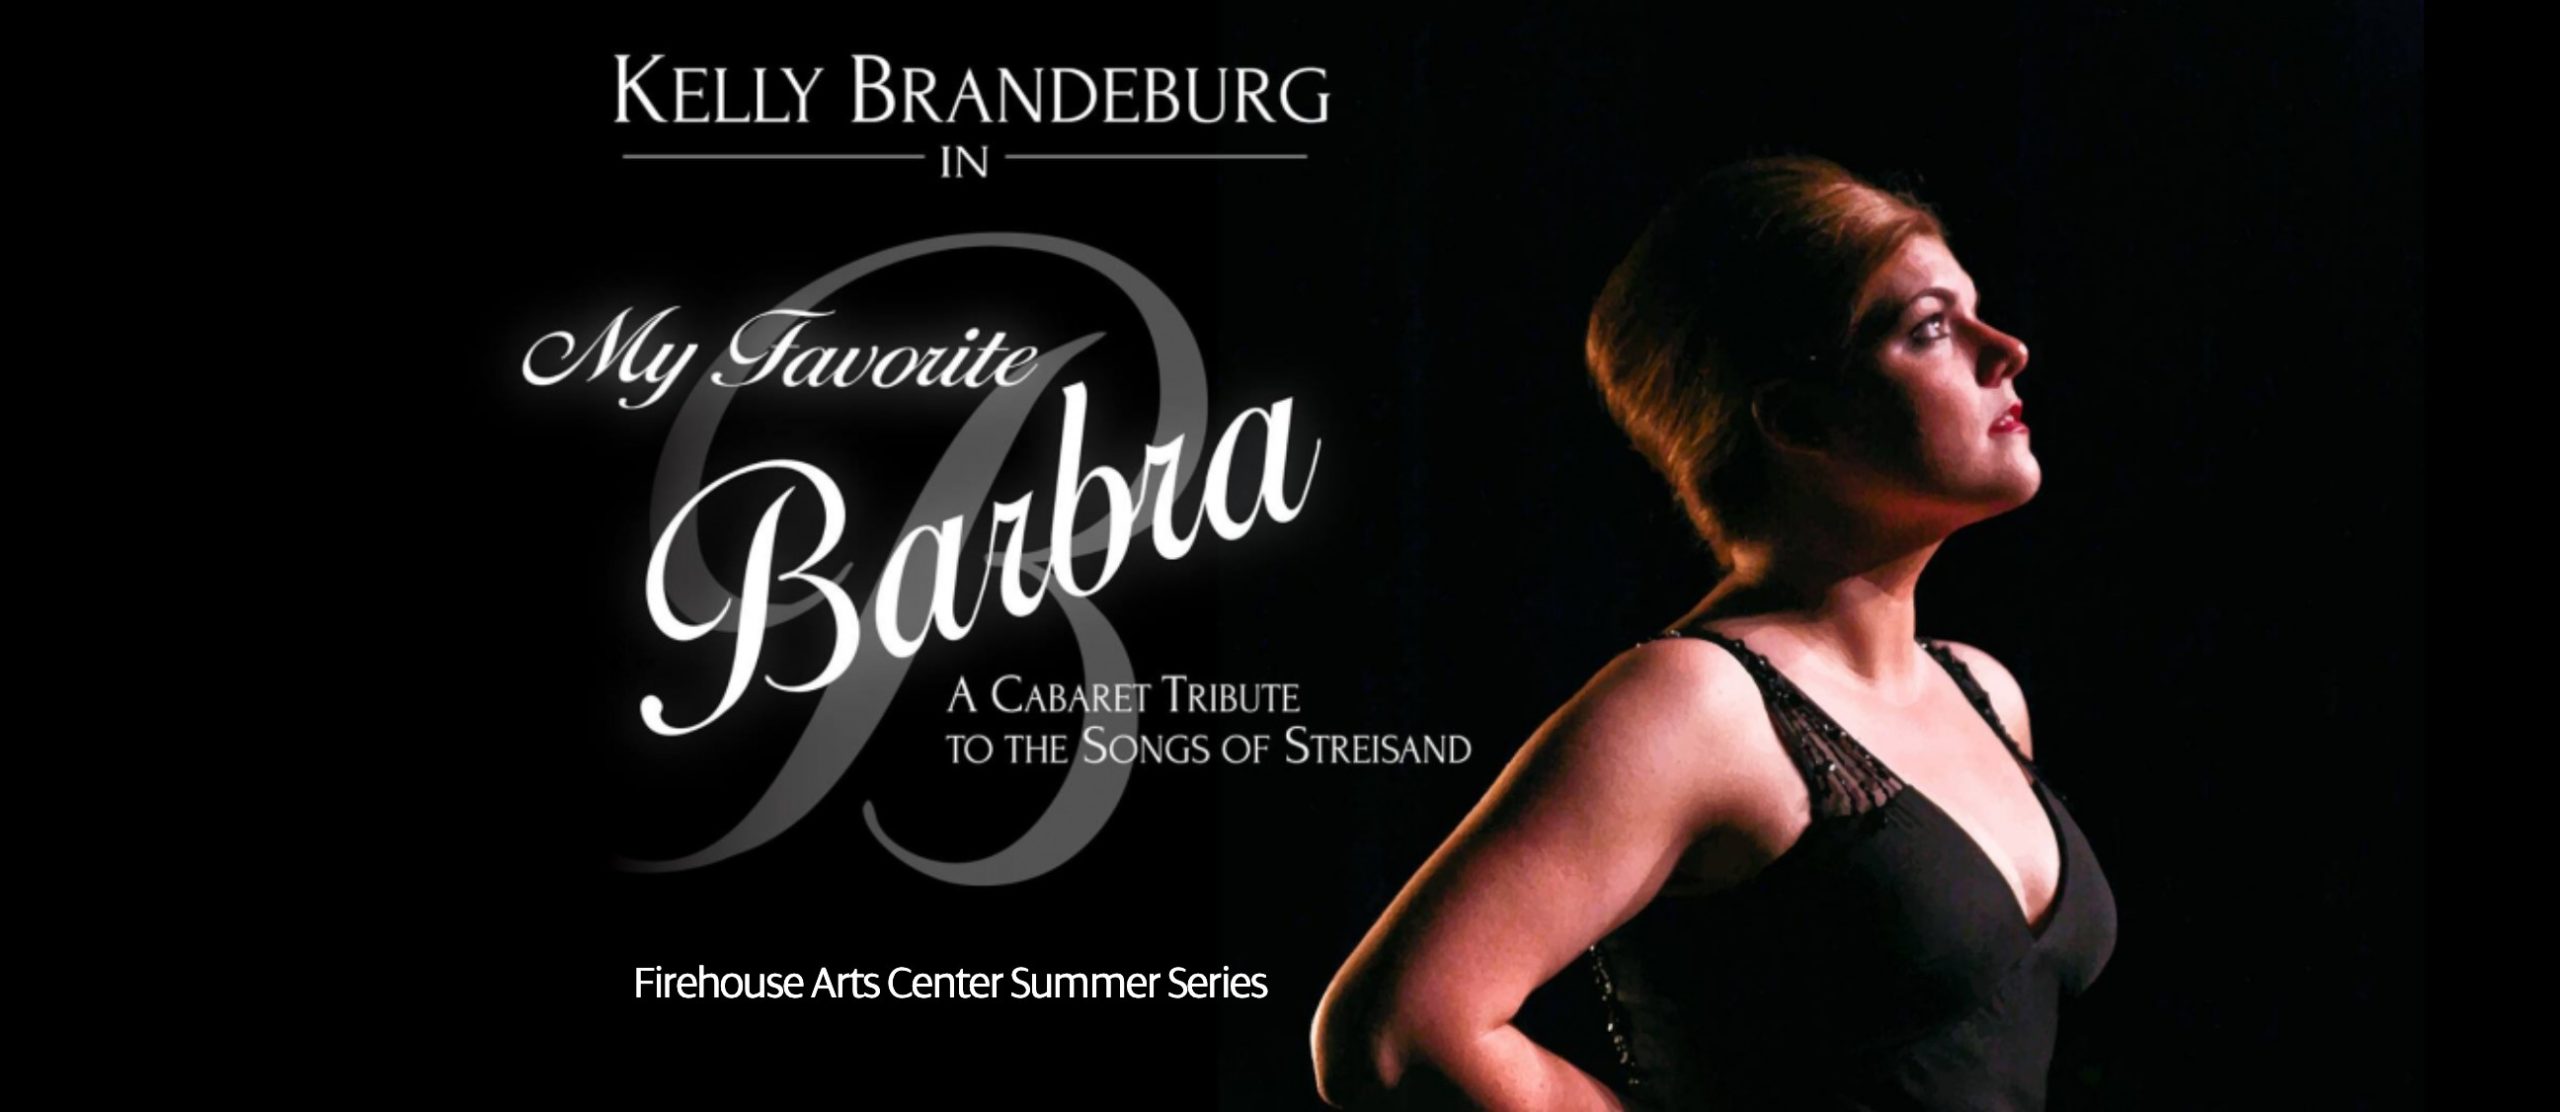 Kelly Brandeburg: A Tribute to The Songs of Barbra Streisand